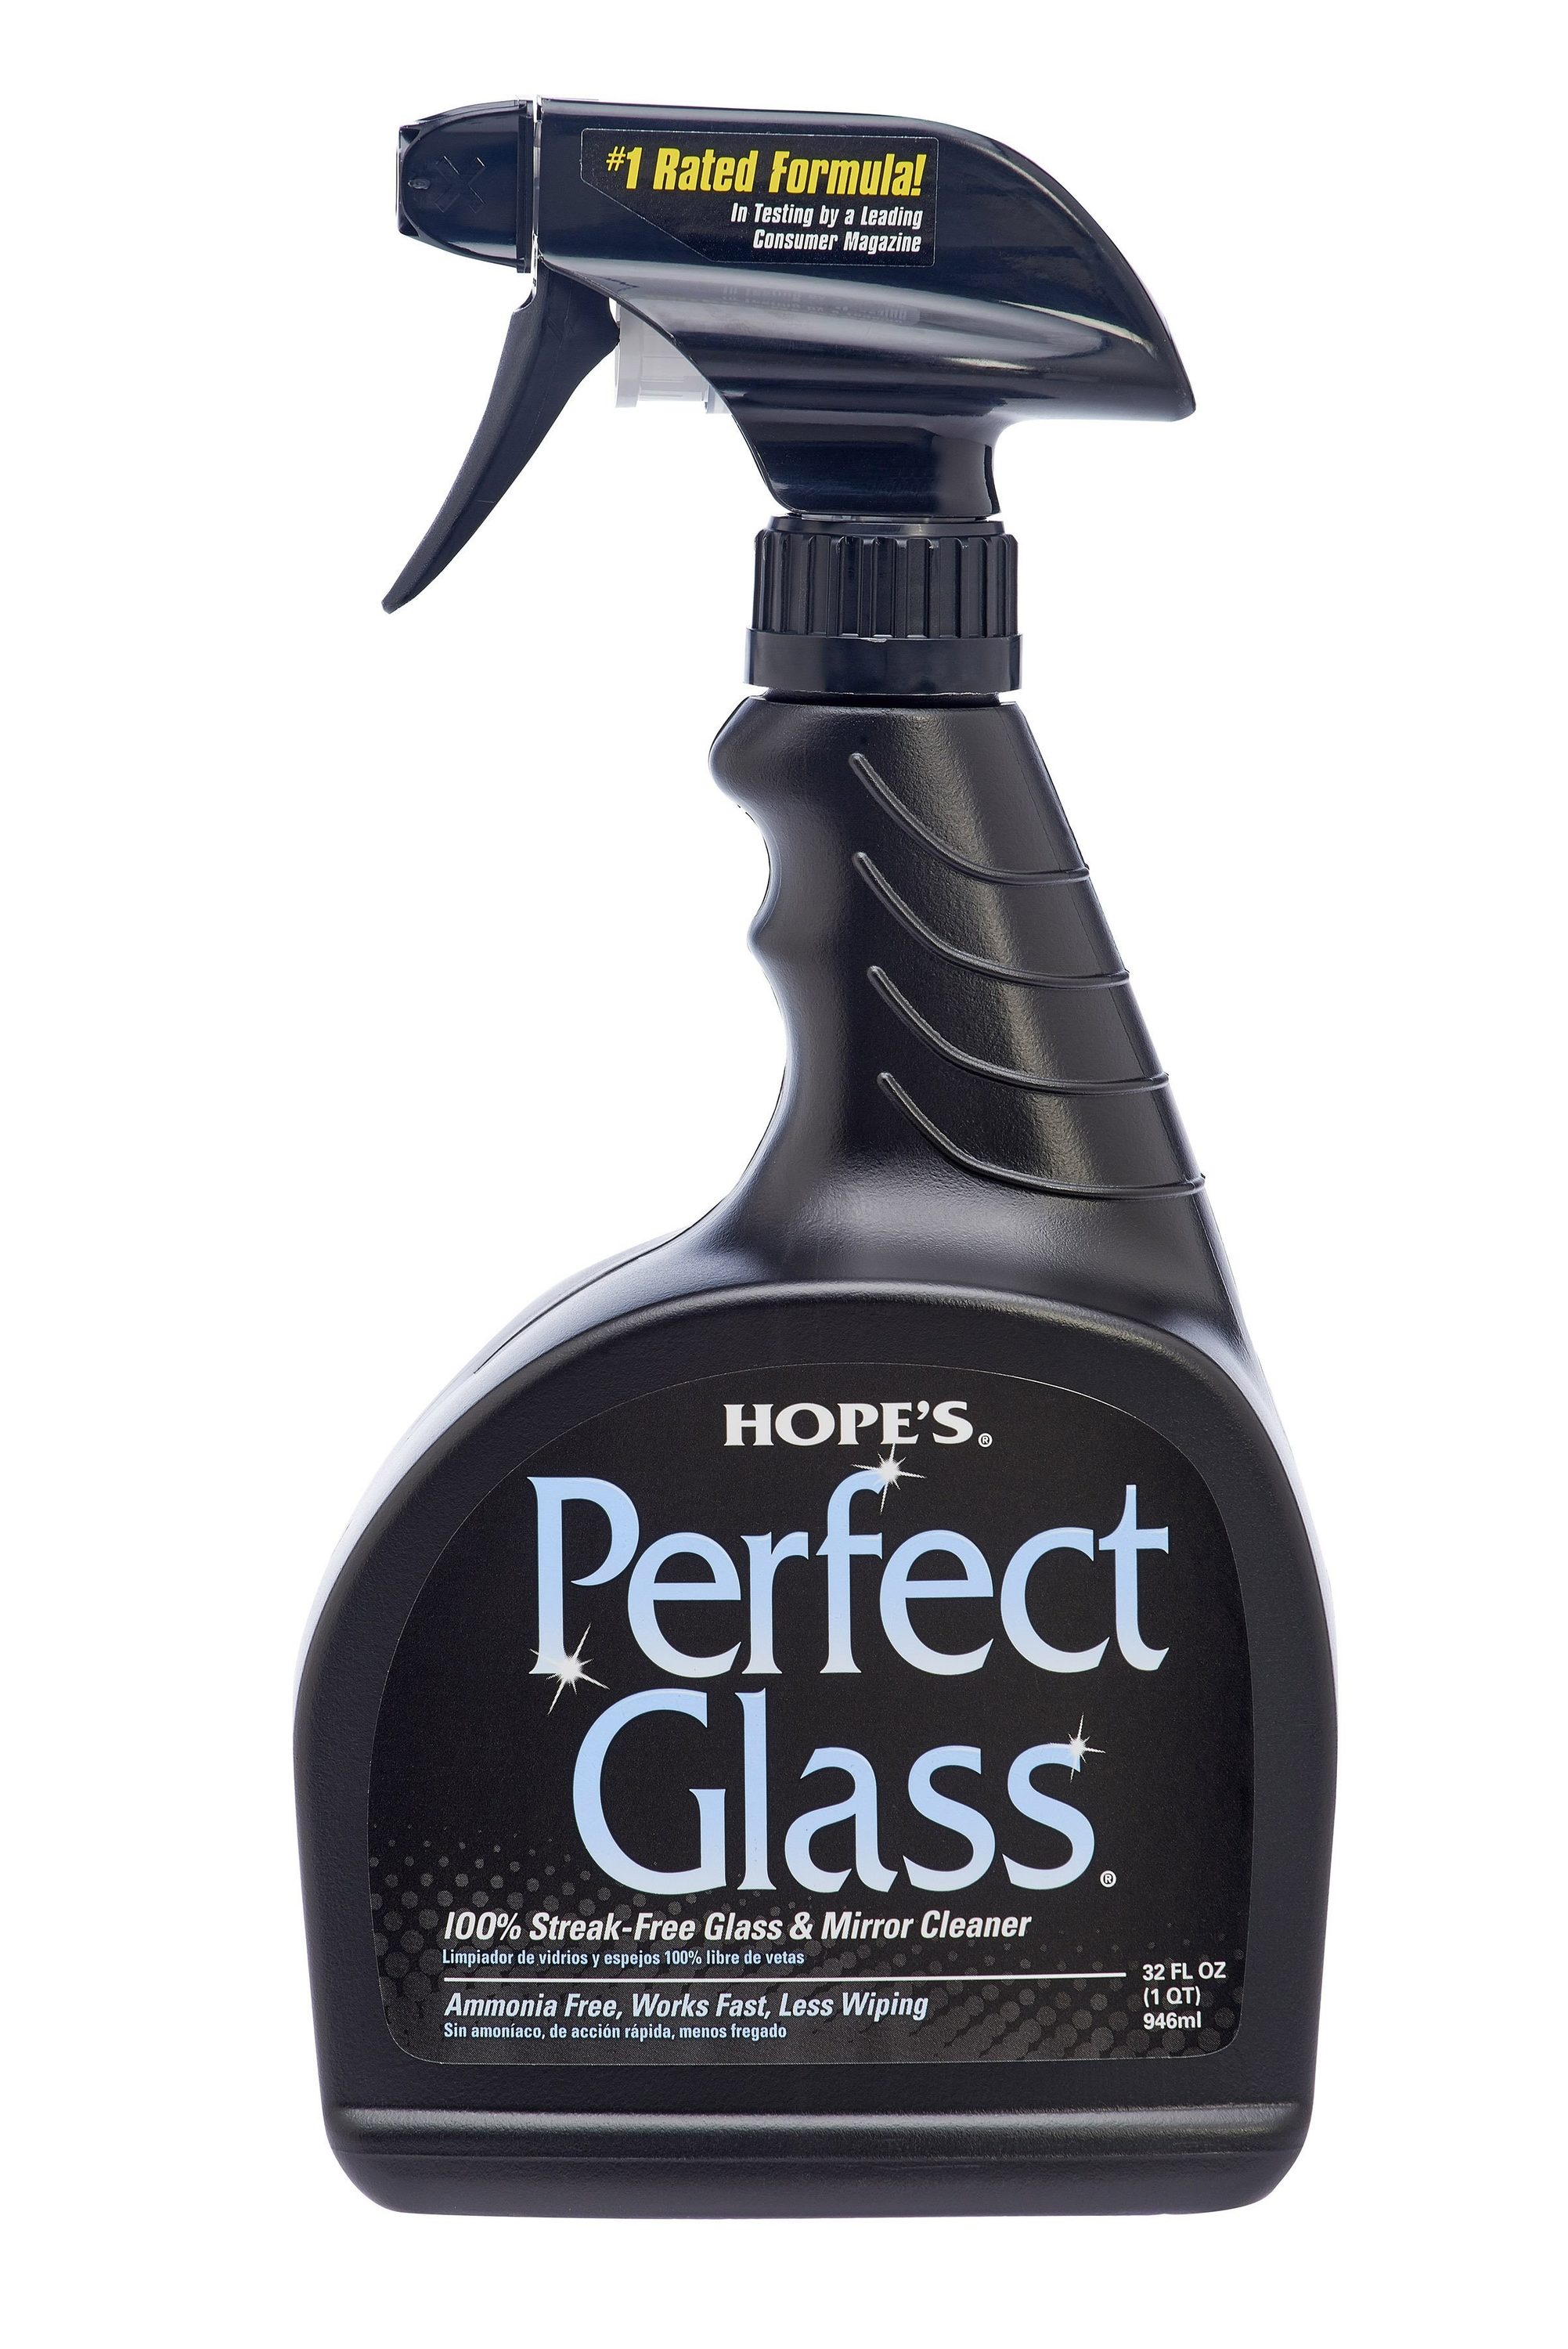 Glass Plus Glass Cleaner, Multi-Surface Glass Cleaner 32 oz (Pack